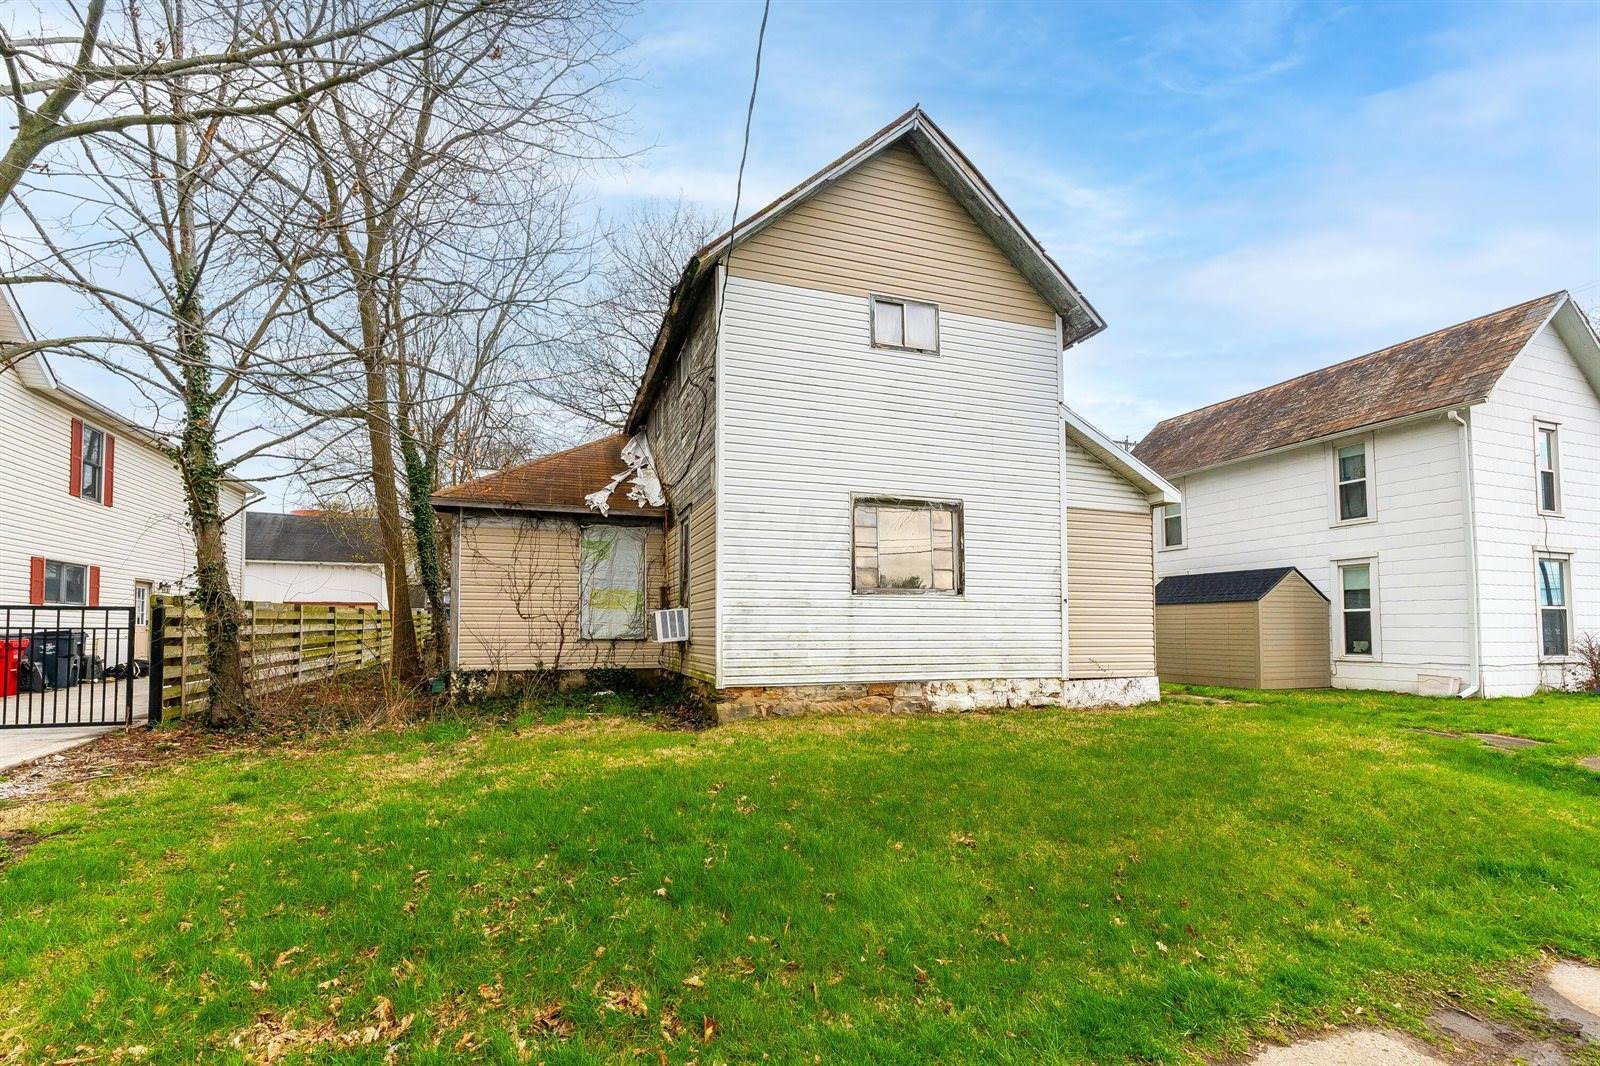 63 East Coshocton Street, Johnstown, OH 43031